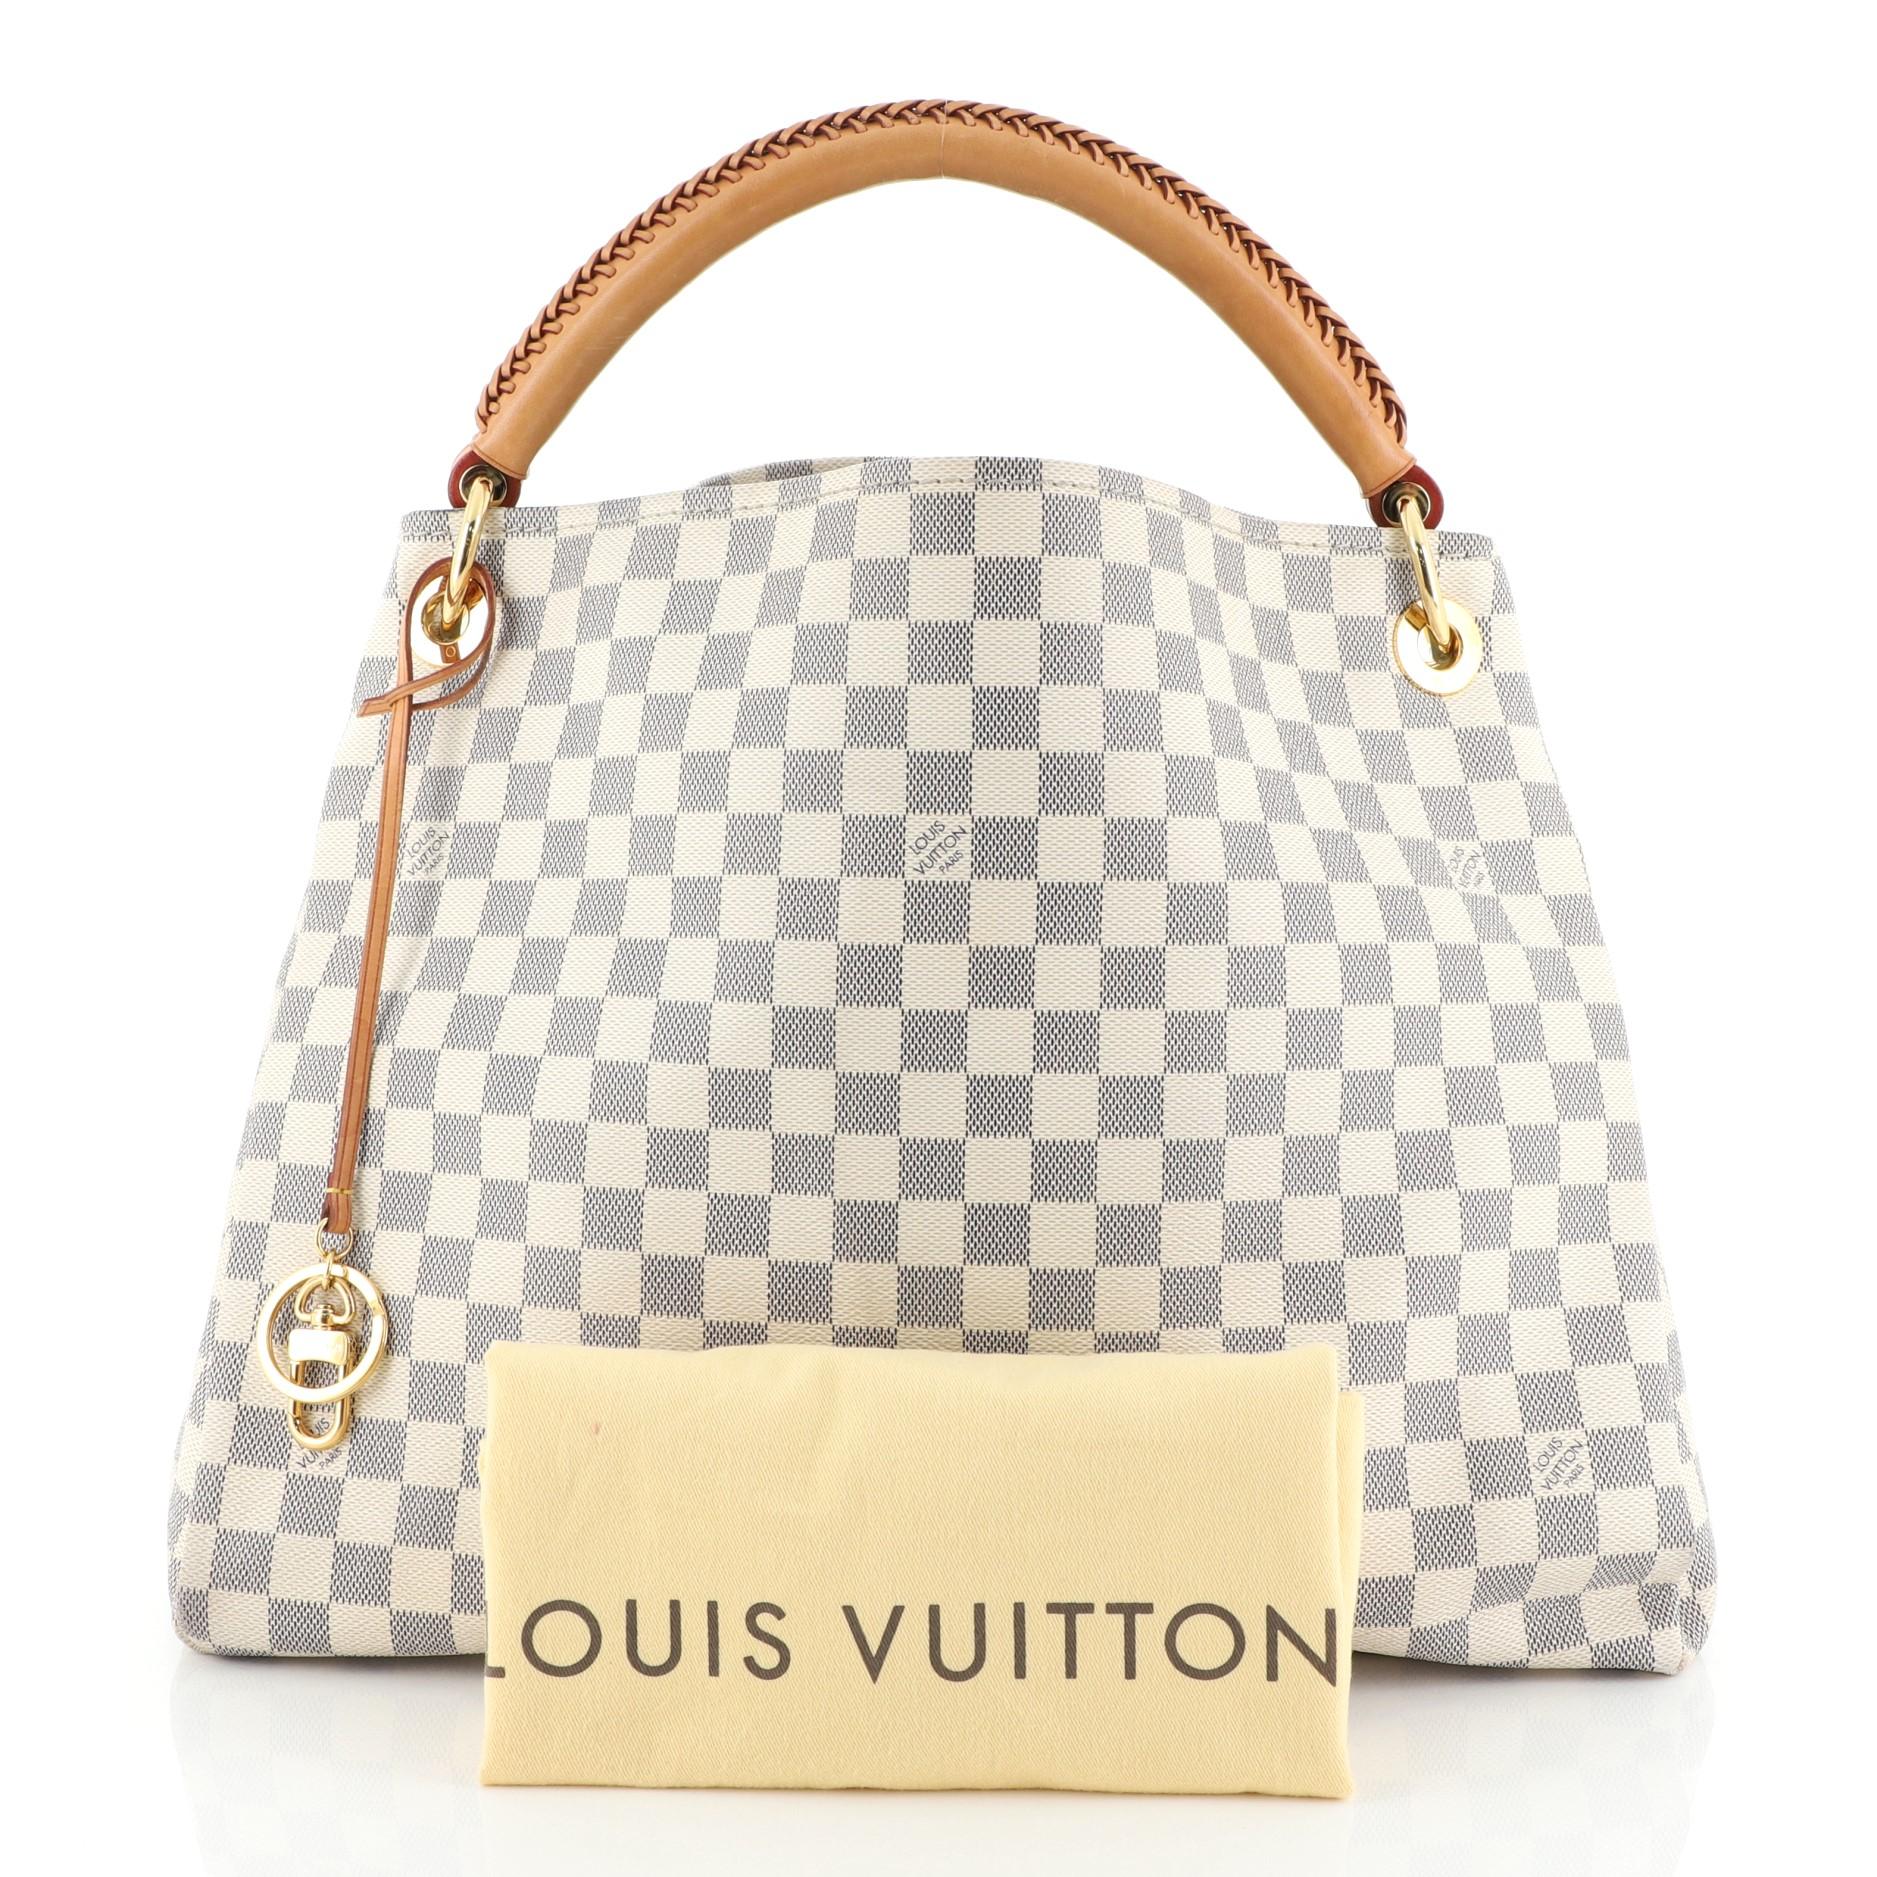 This Louis Vuitton Artsy Handbag Damier MM, crafted from damier azur coated canvas, features a rolled leather handle with braided detailing, protective base studs, and gold-tone hardware. It opens to a neutral microfiber interior with side zip and